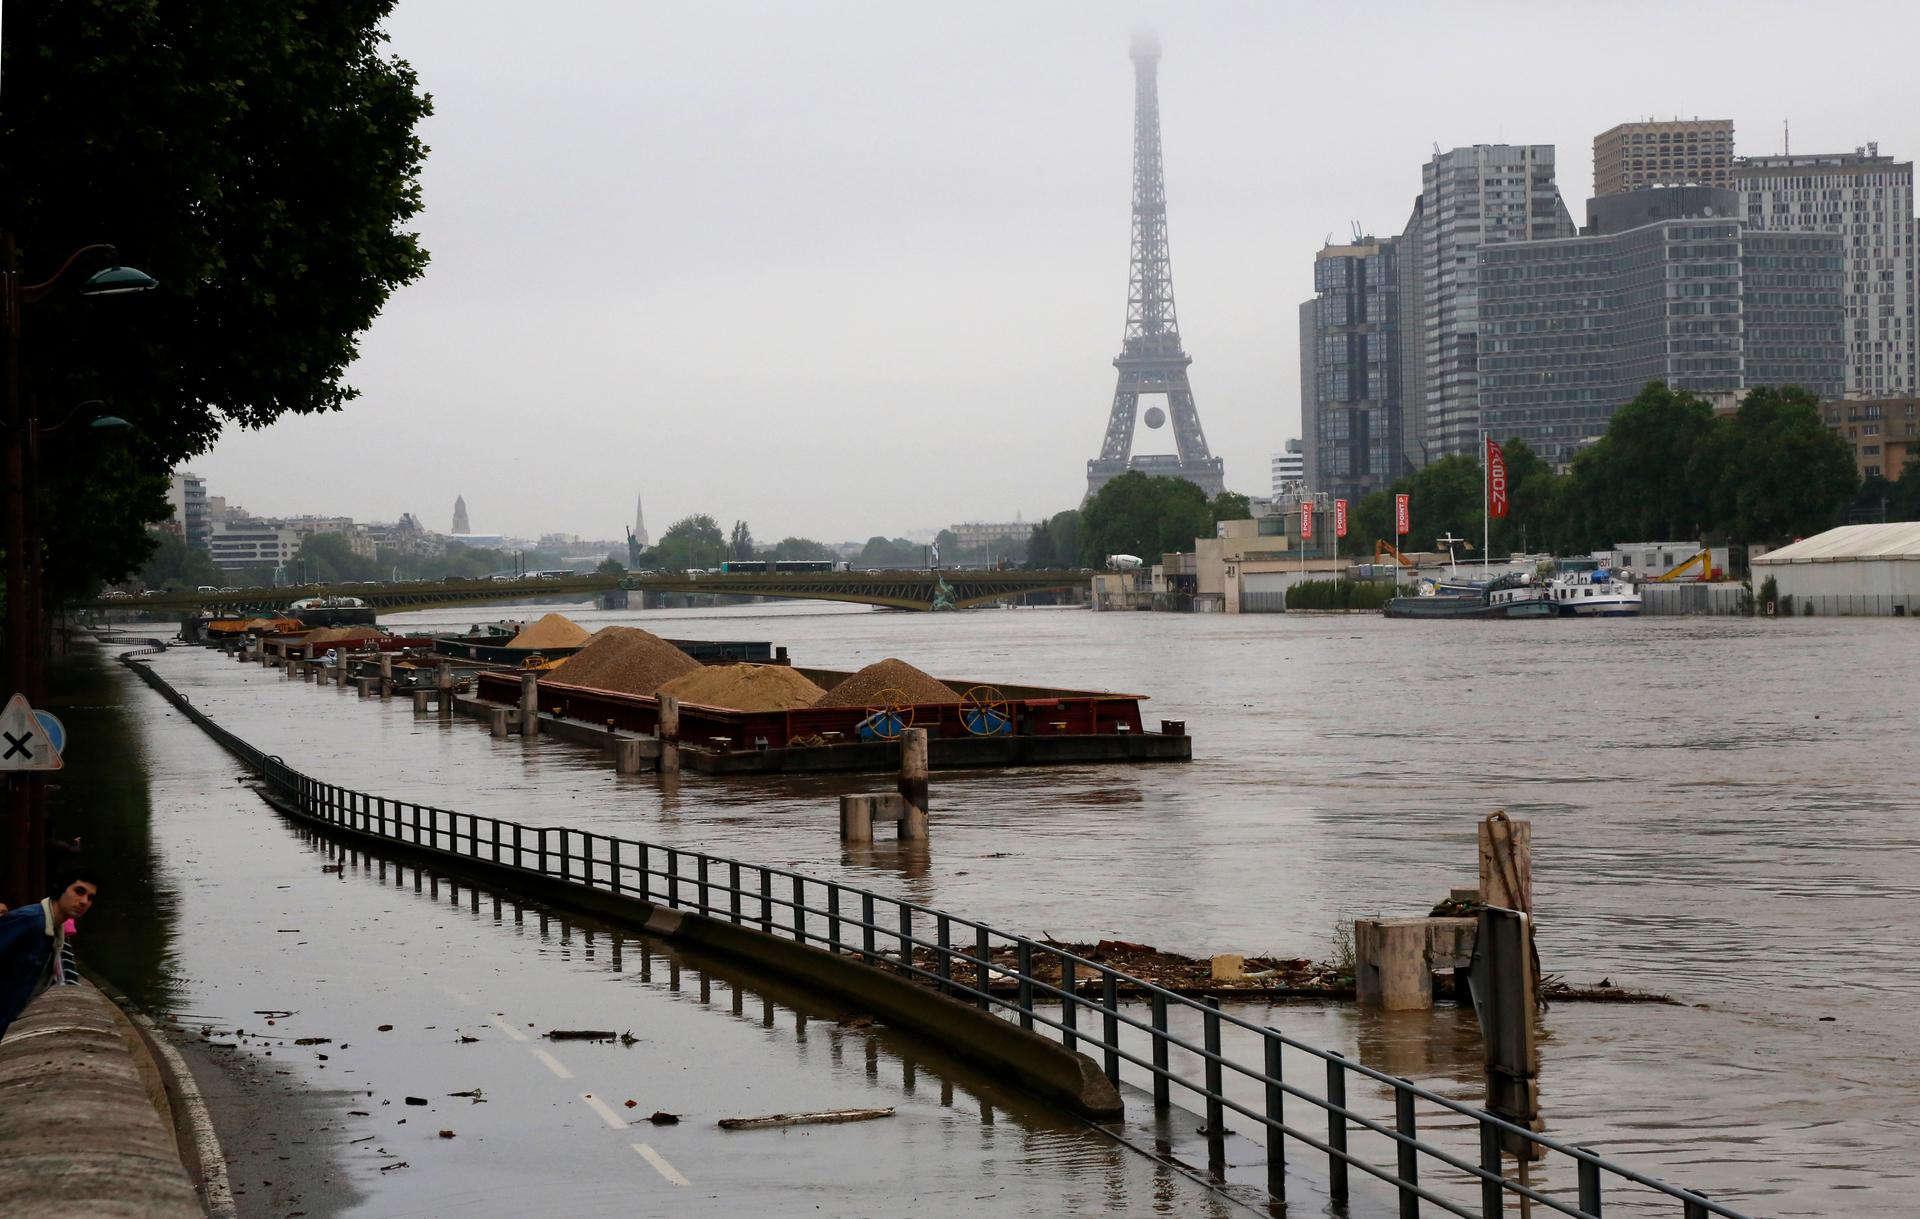 Barges are moored together near the Eiffel Tower